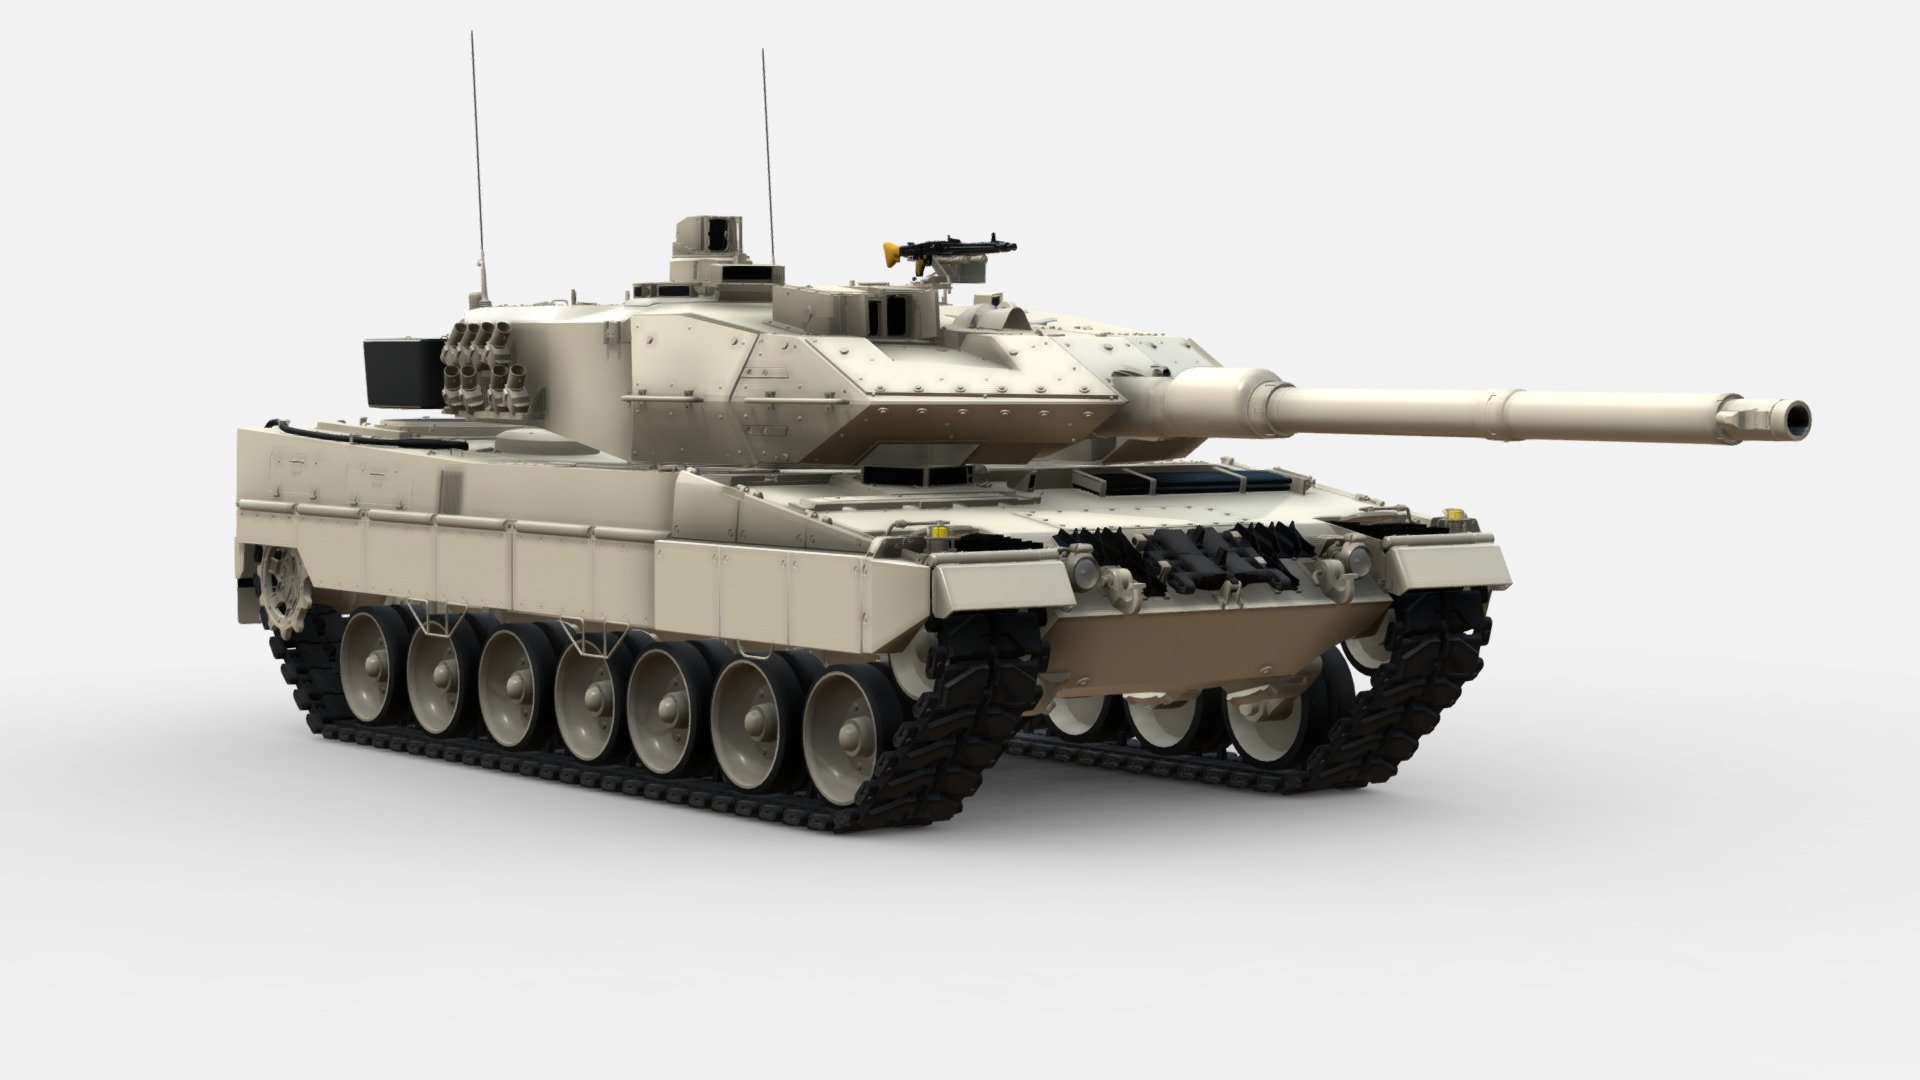 The Leopard 2A6 3D model is an exact replica of the German battle tank. This model has been carefully designed, taking into account all the details and proportions of the original vehicle. Perfect for use in projects related to computer graphics, animations or 3D printing.

See all collection: https://skfb.ly/oOsVF - 3d Model TANK LEOPARD 2 A6 - Buy Royalty Free 3D model by zizian 3d model